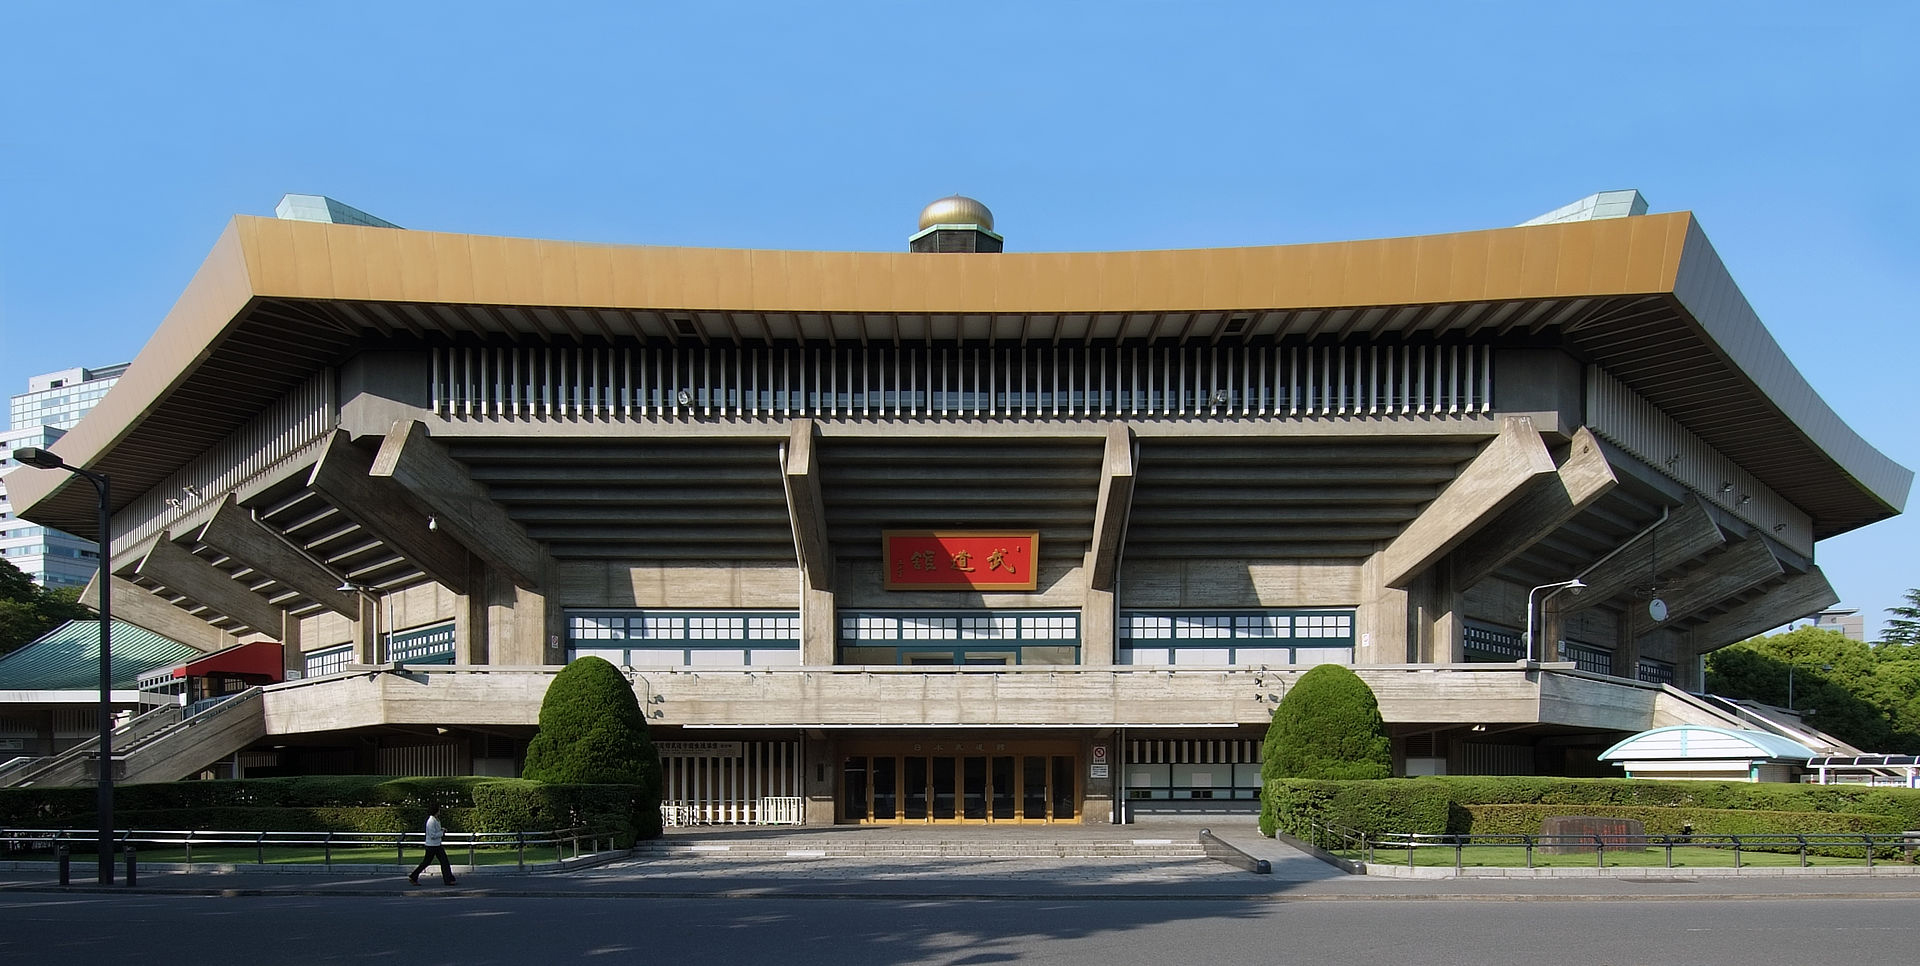 Enduring legacy: Nippon Budokan was one of many structures built for the 1964 Tokyo Olympics. Designed by architect Mamoru Yamada, it played host to the first Olympic judo event. | WIKIPEDIA